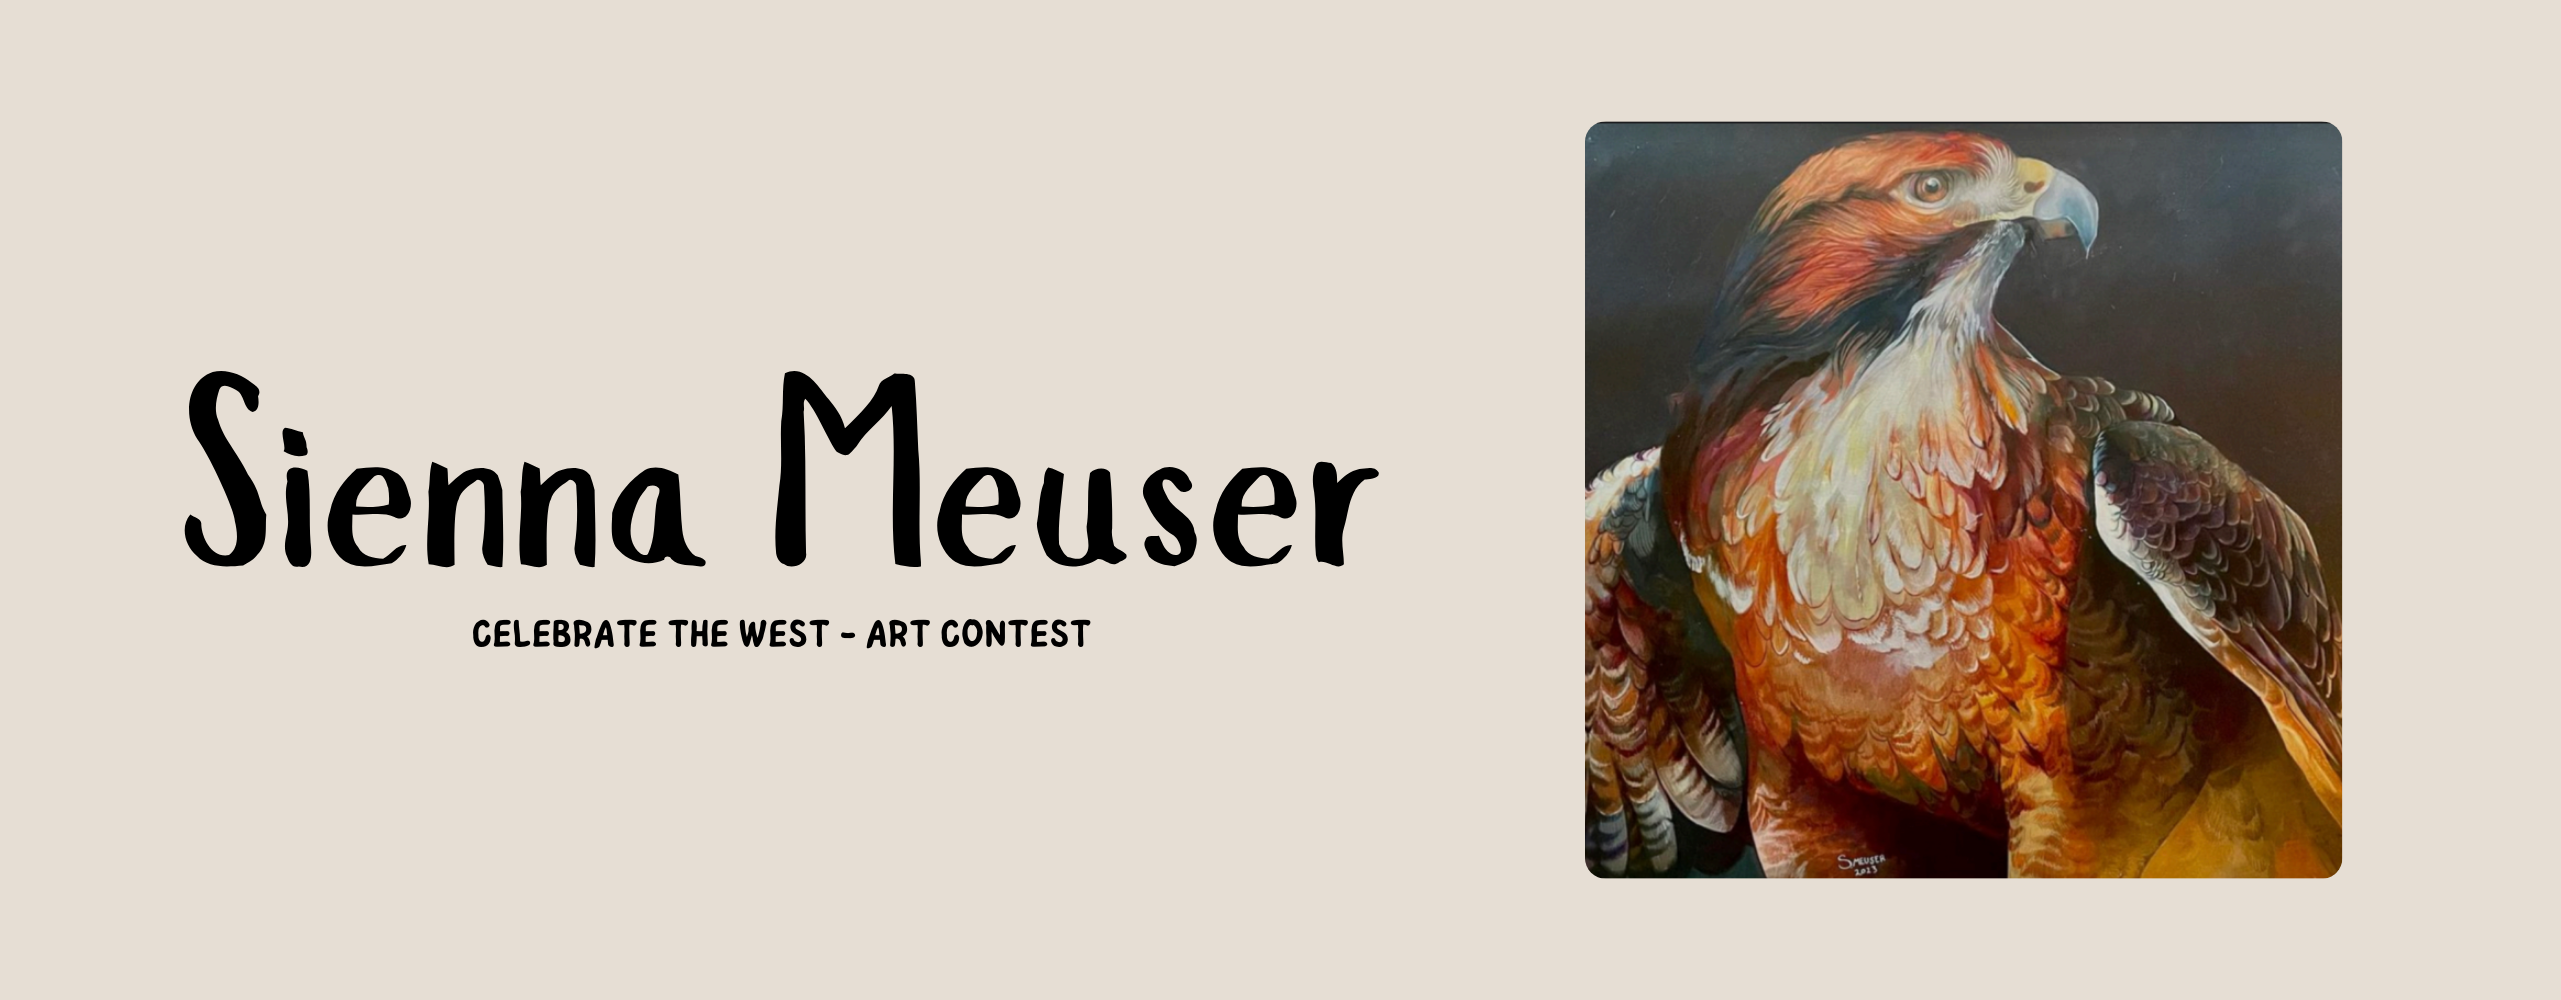 Sienna Meuser: Celebrate the West - Art Contest (image of red tailed hawk)